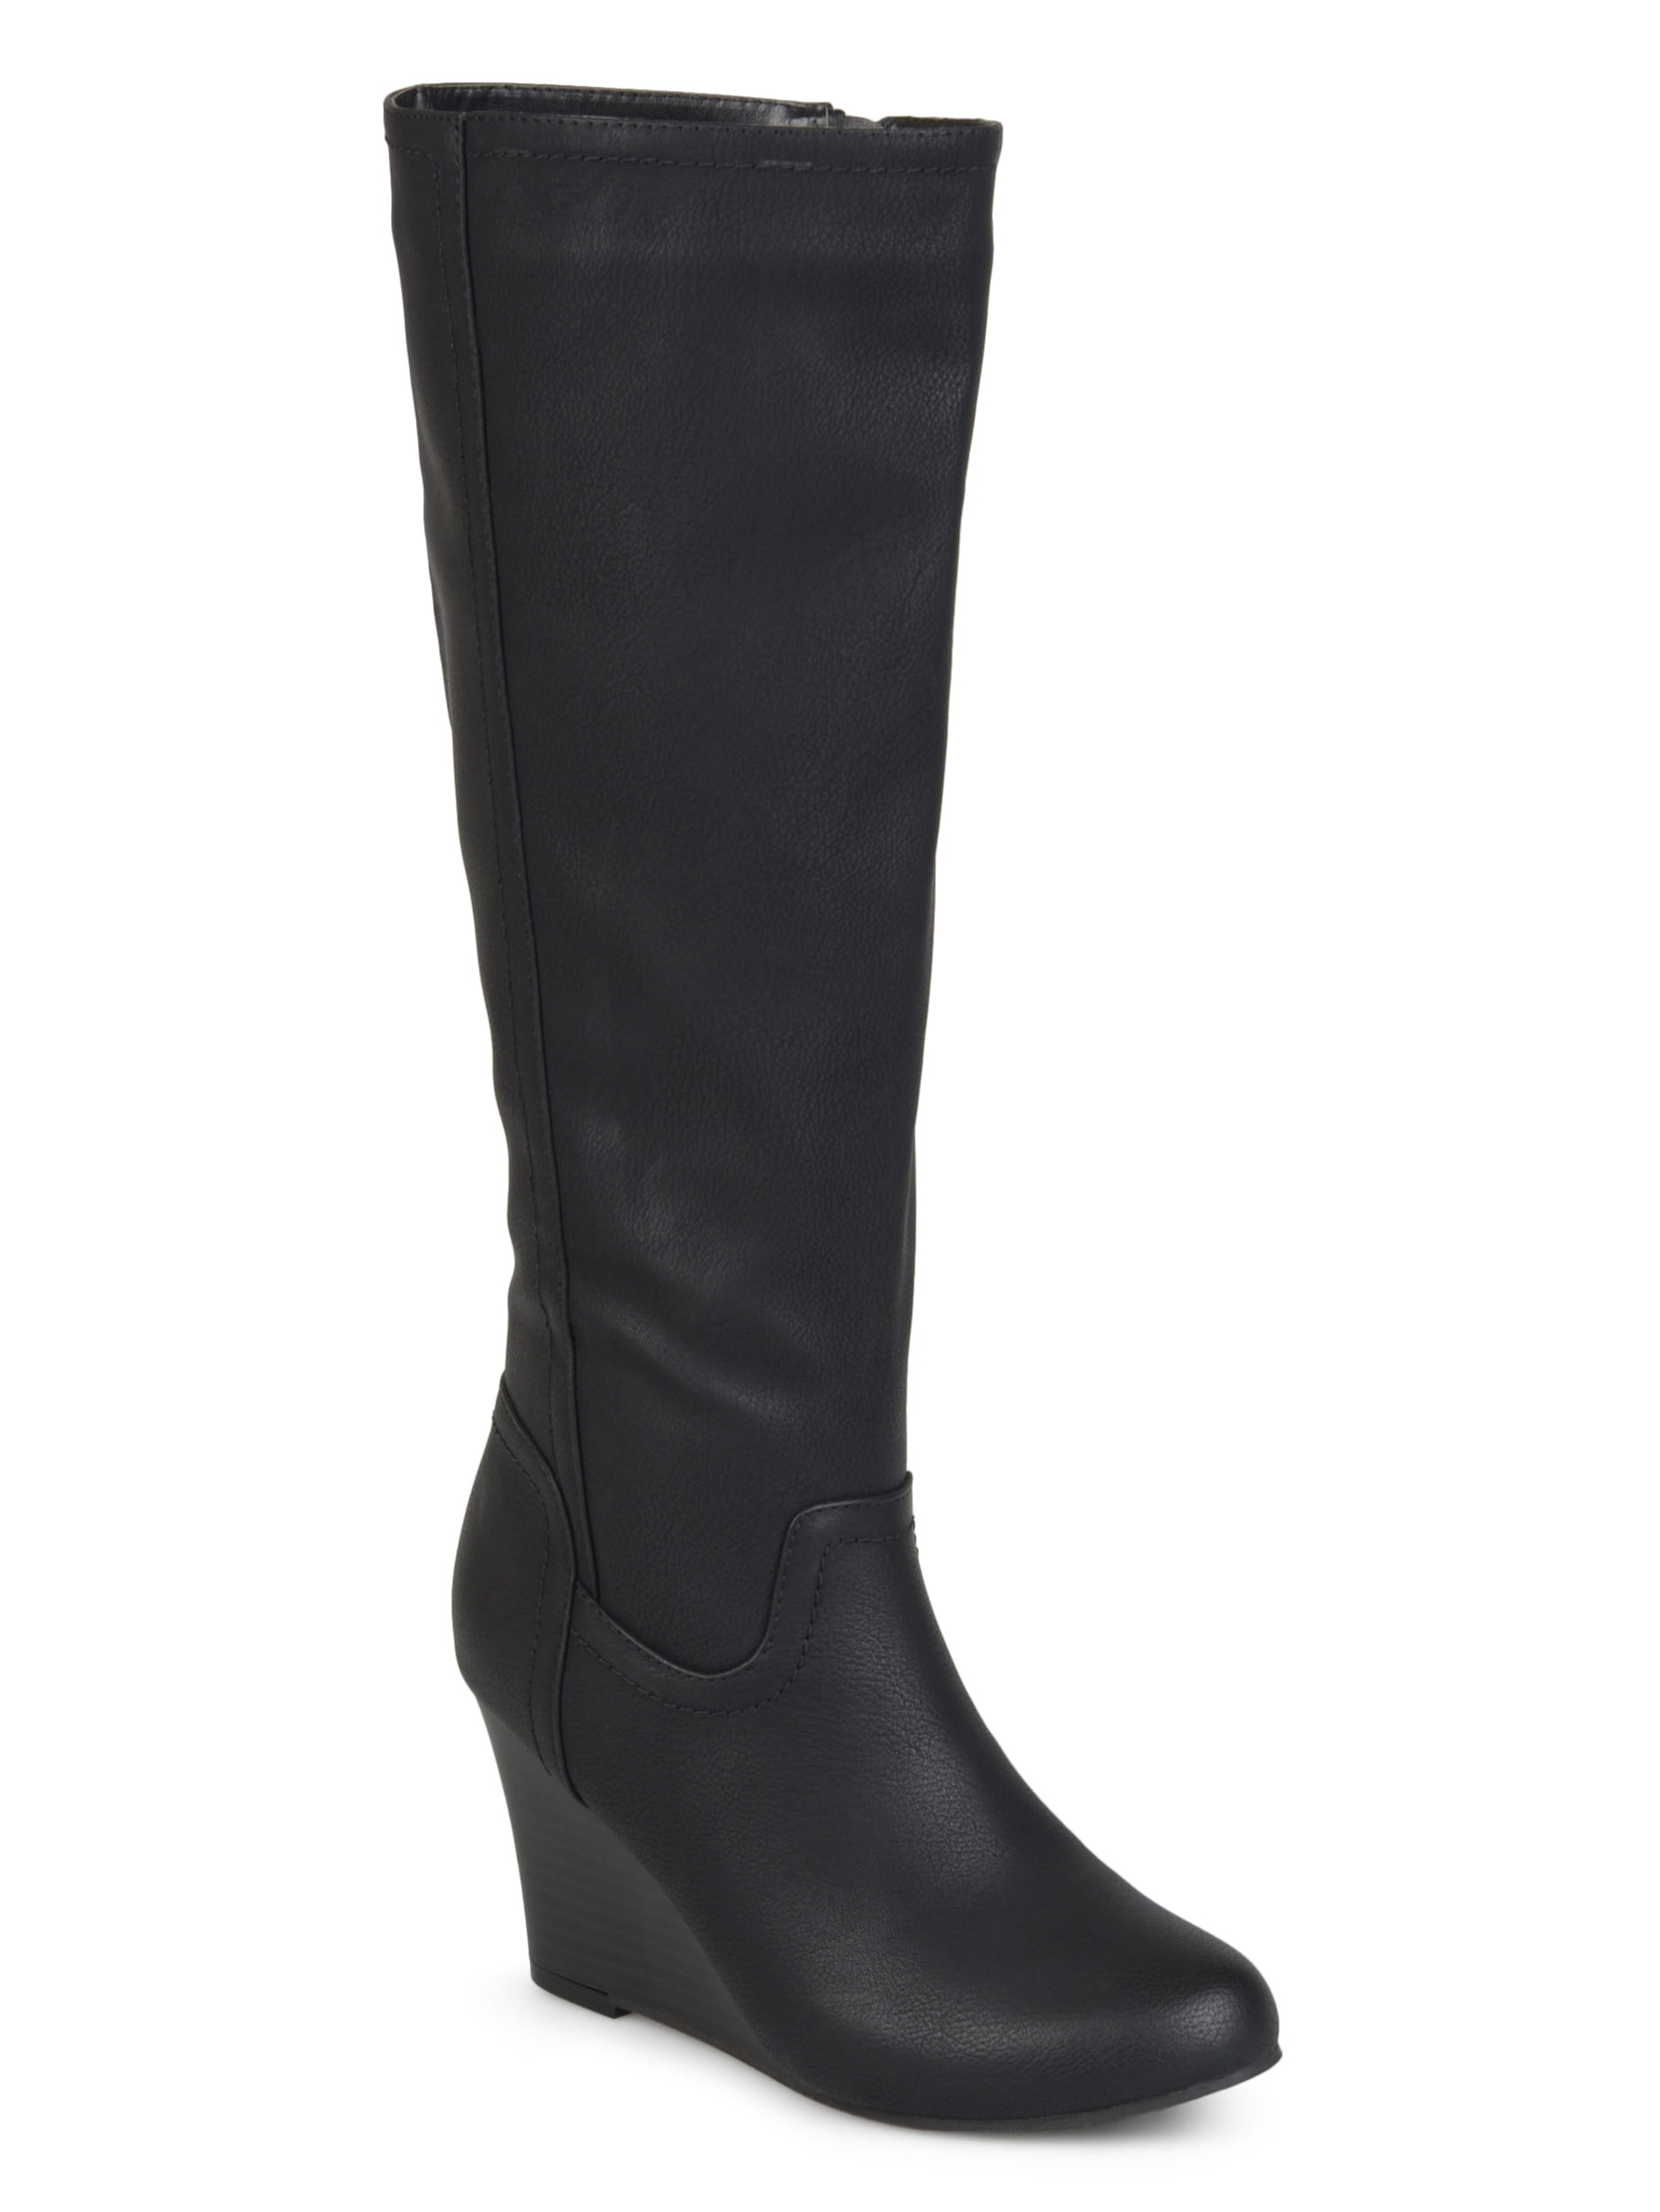 Women's Wide Calf Round Toe Faux Leather Mid-calf Wedge Boots - Walmart.com